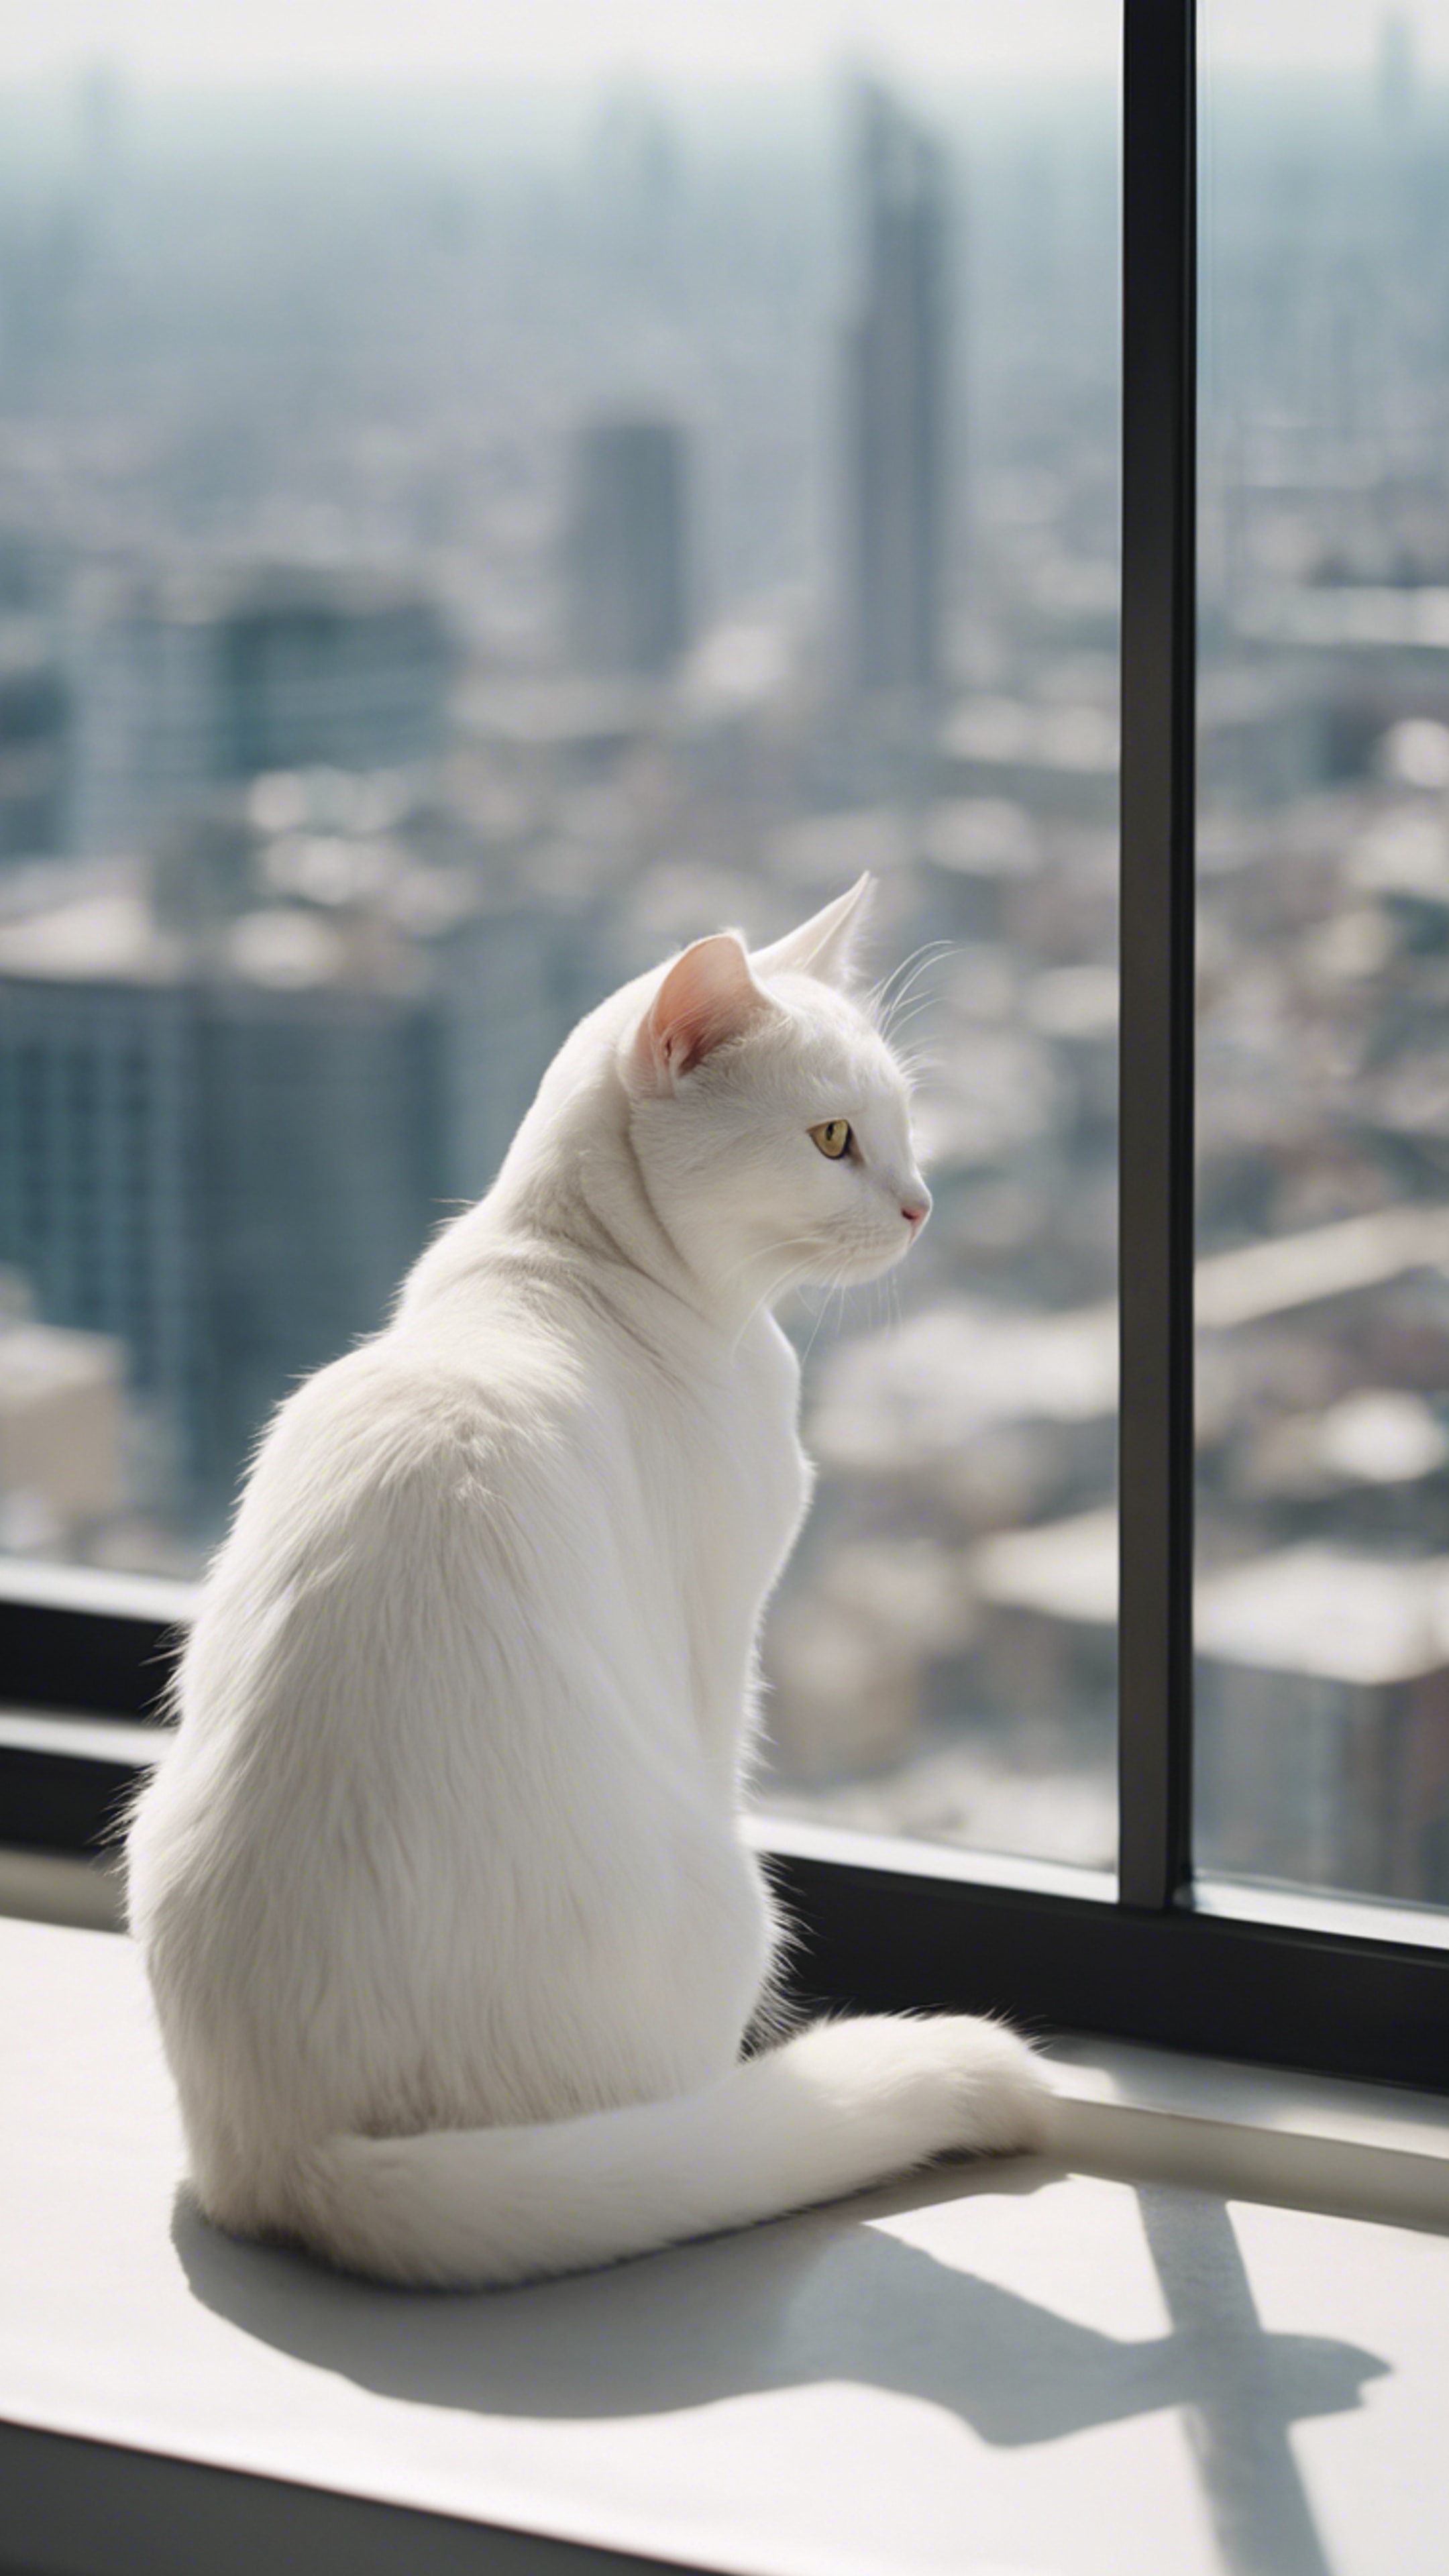 A white cat lying peacefully on a windowsill, admiring a city view from a skyscraper. Tapetai[751c381e97644d32a2eb]